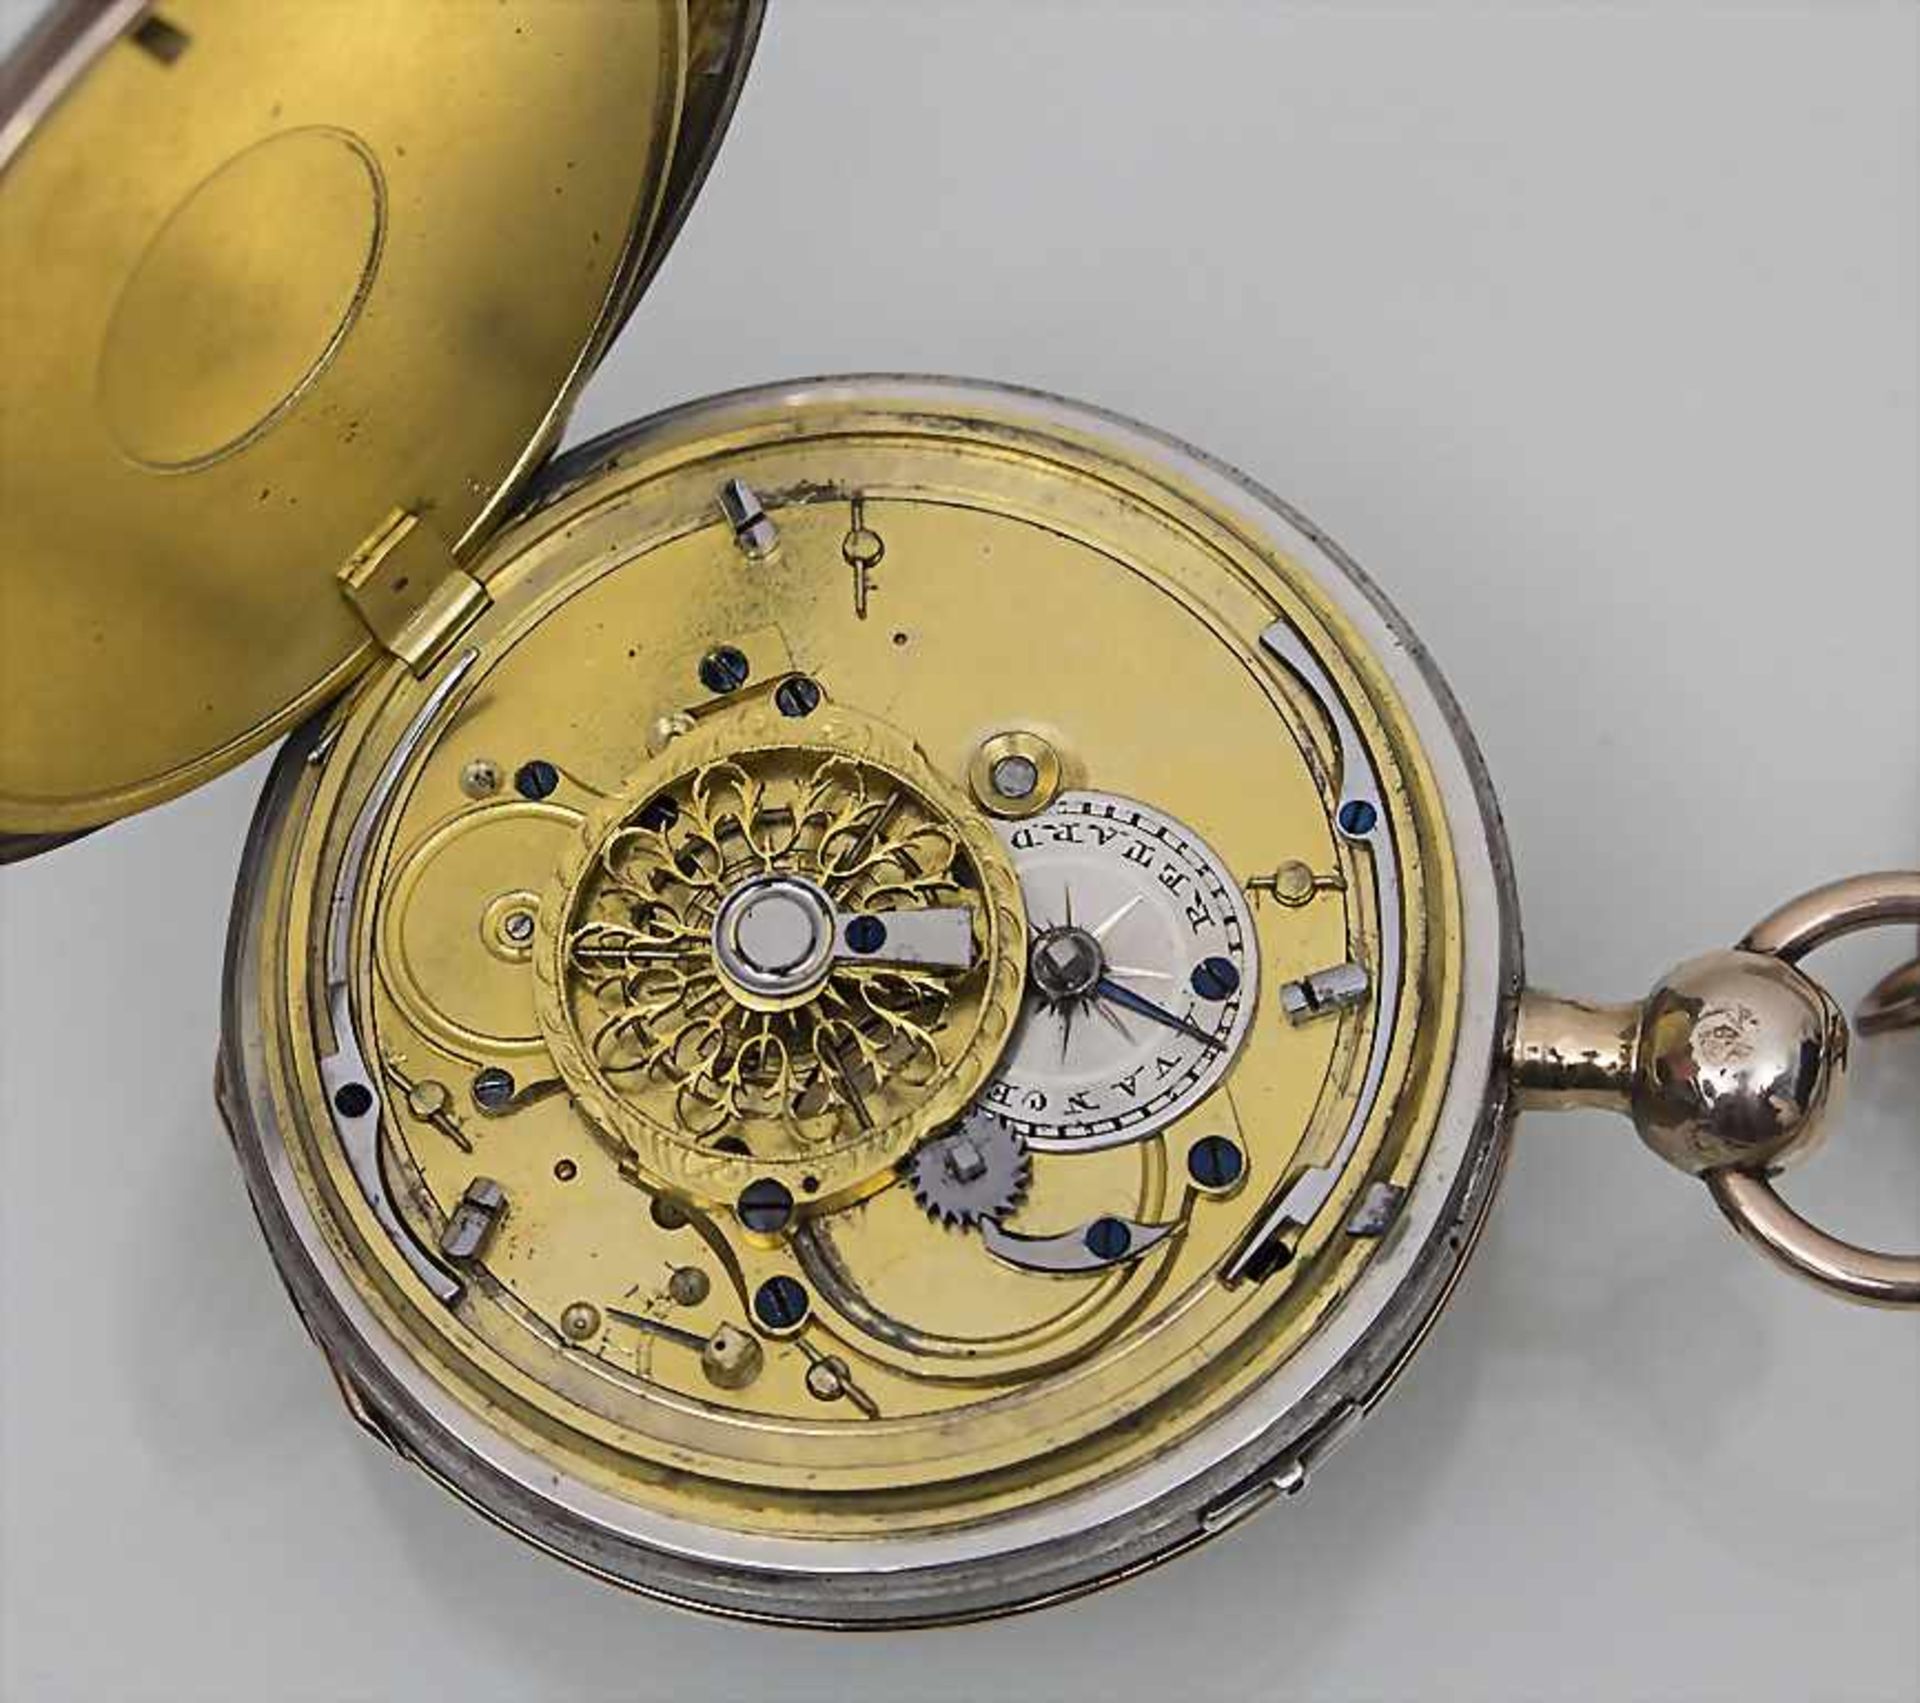 Taschenuhr / Pocket Watch, ¼-Repetition, Swiss Made, ca. 1850Gehäuse: Rotgold/Silber, Nr. - Image 2 of 2